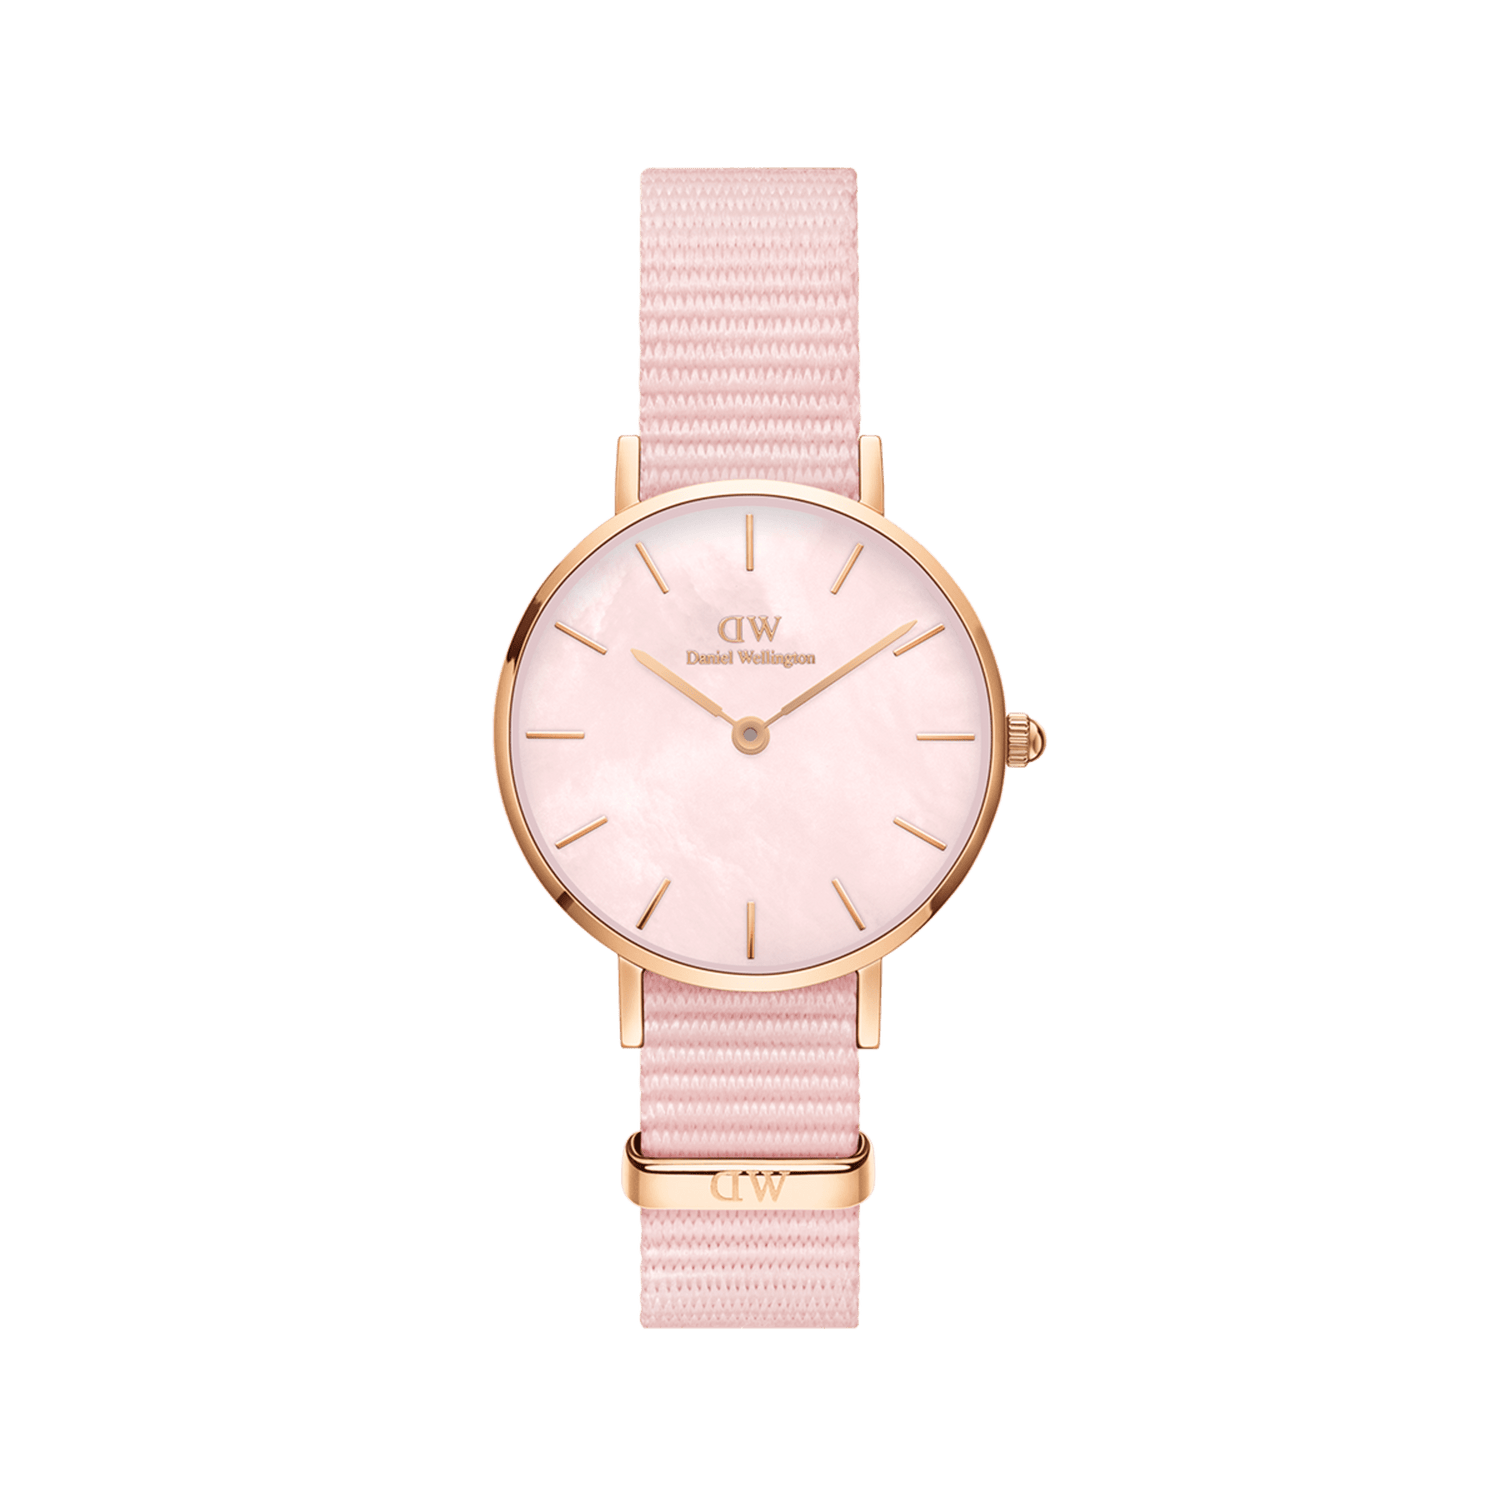 Petite Rouge - Small Women's Watch Pink | DW